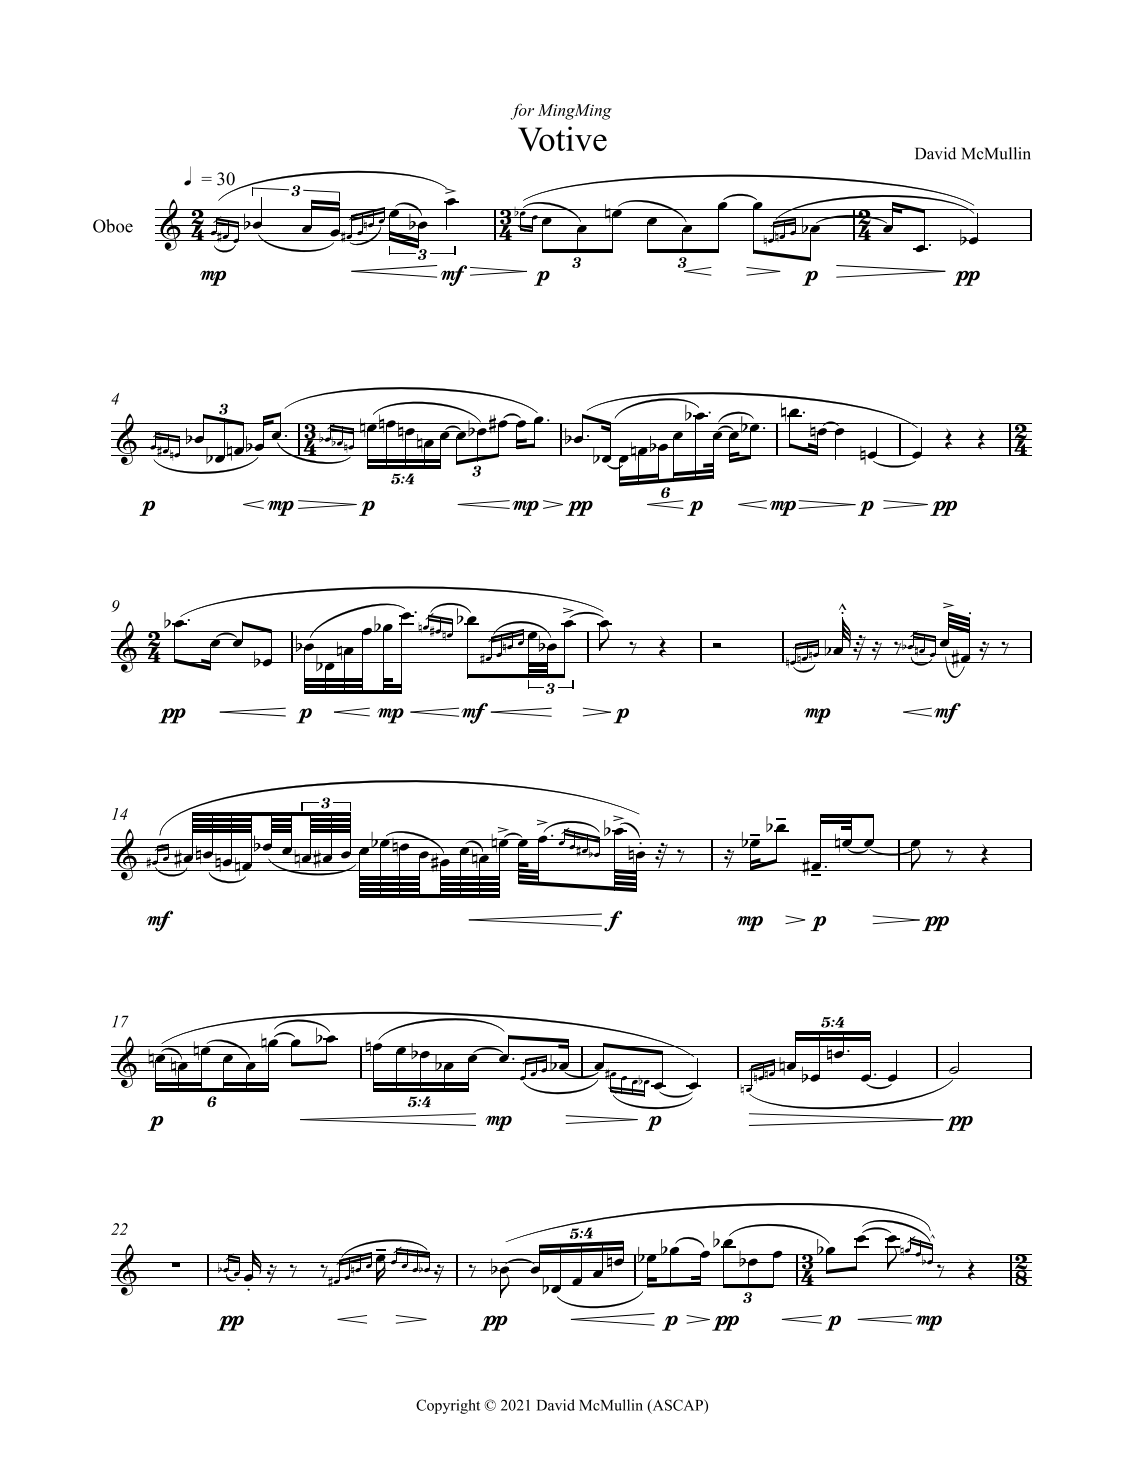 first page of musical score: links to view/download PDF of full score